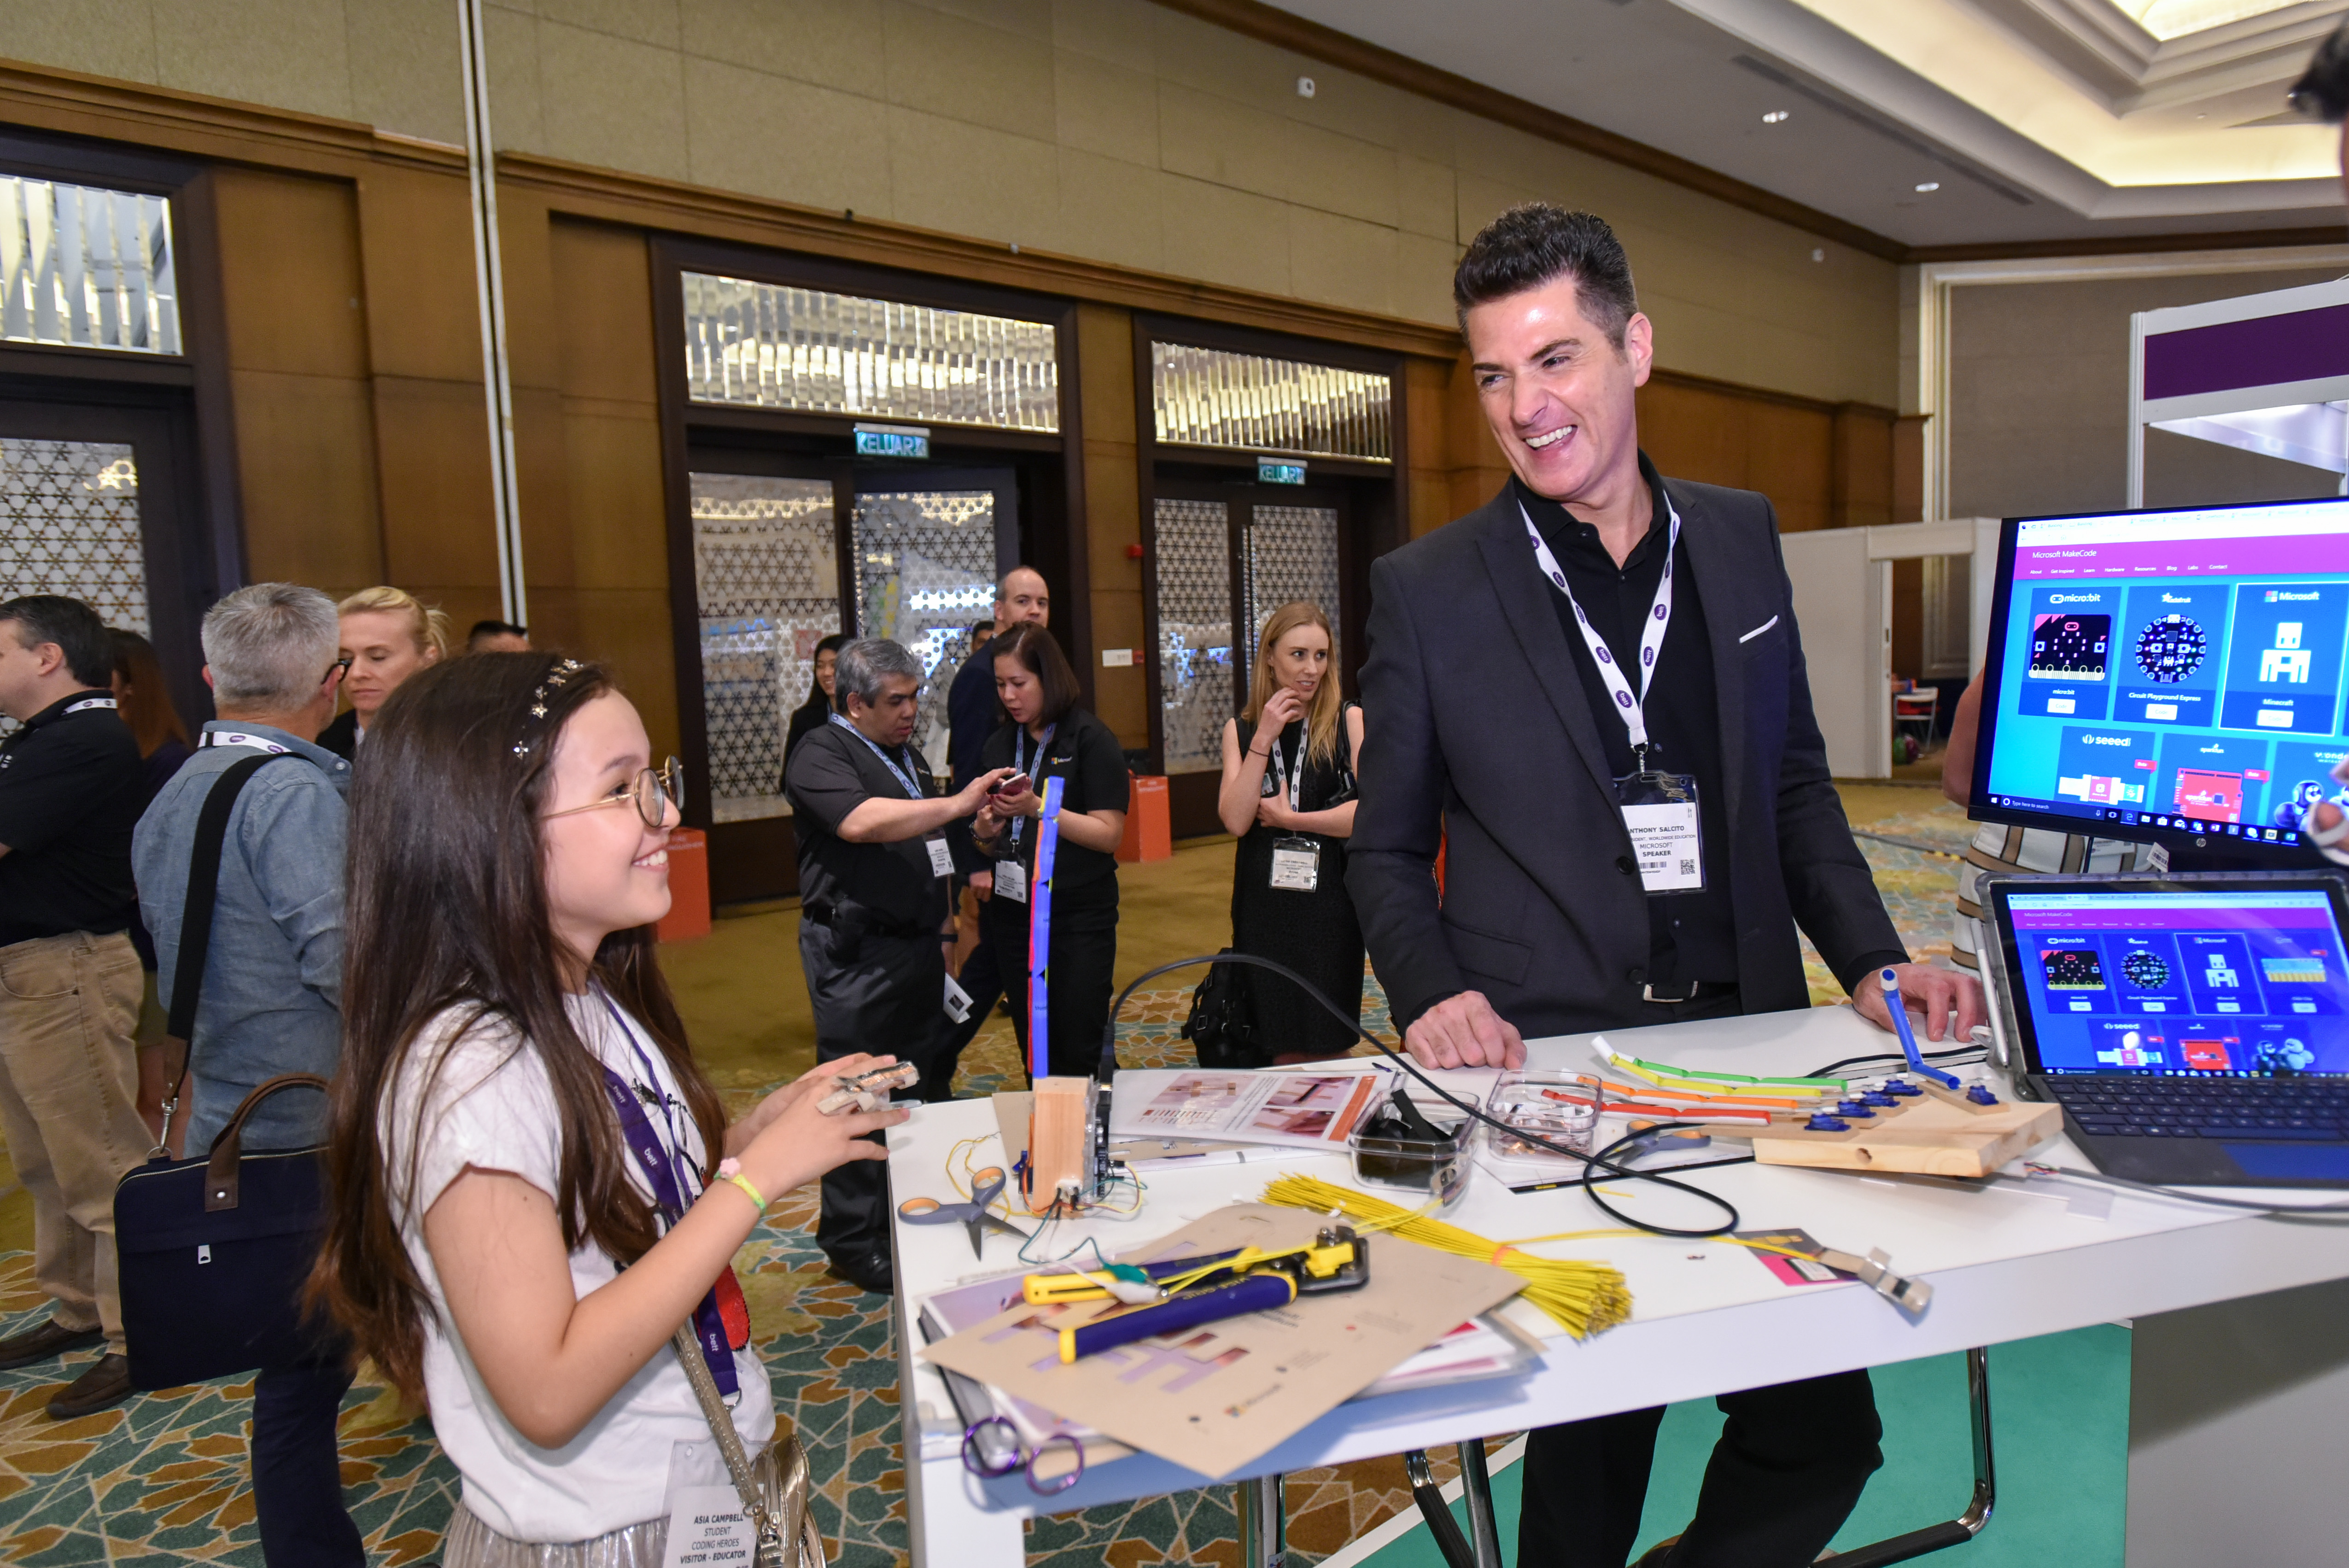 Anthony Salcito, Vice President of Worldwide Education, Microsoft sharing a candid moment with a student trying her hands at basic coding at Bett Asia